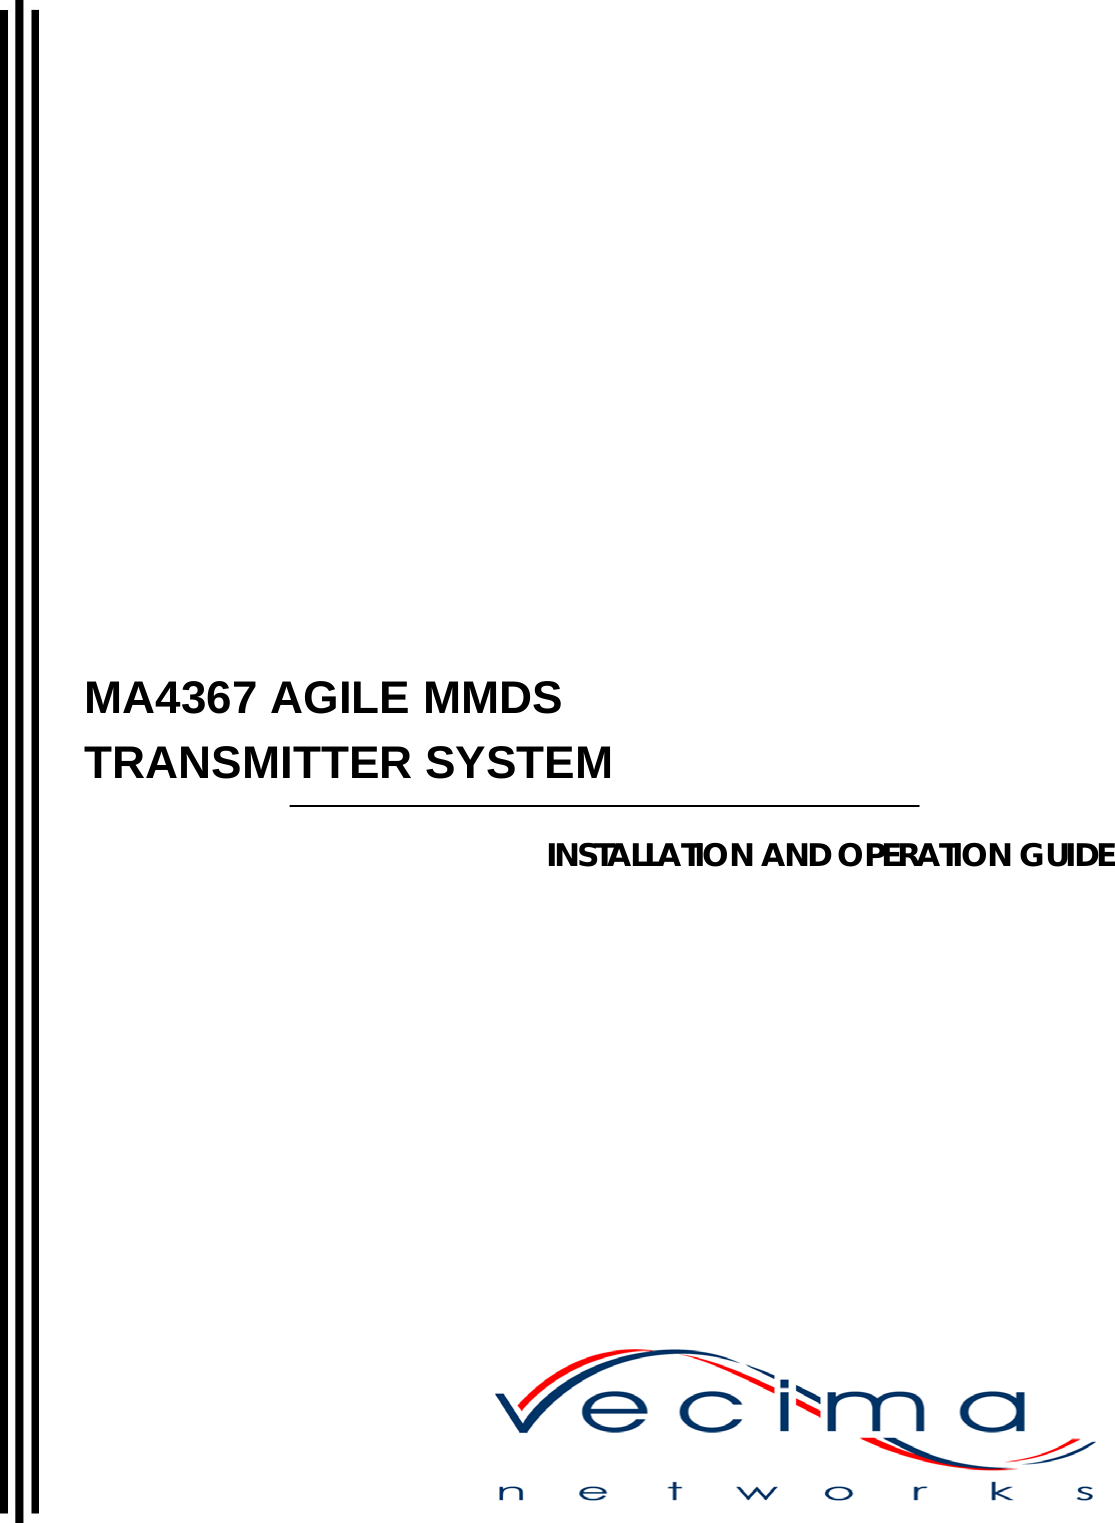   MA4367 AGILE MMDS TRANSMITTER SYSTEM  INSTALLATION AND OPERATION GUIDE 